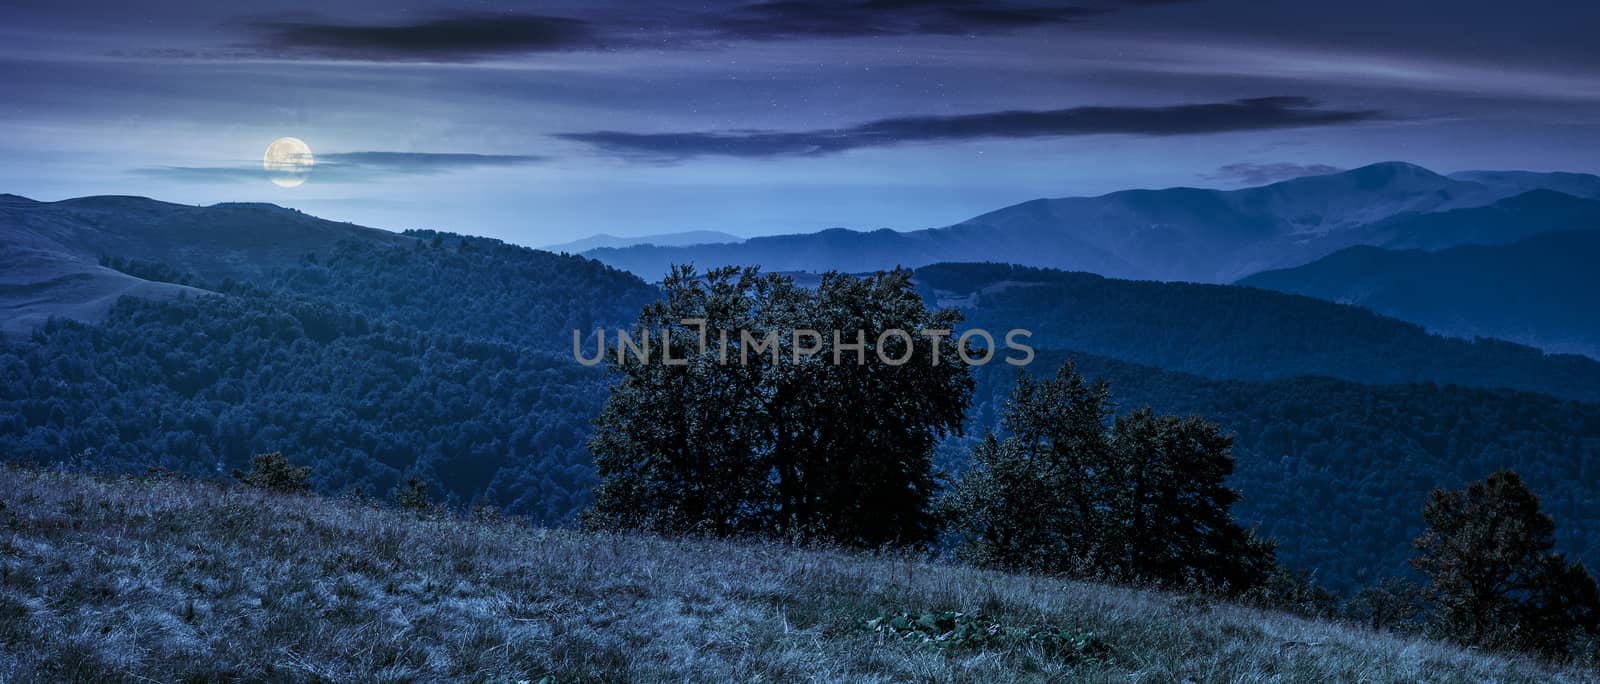 beautiful panorama of Carpathian mountains in early autumn weather. few beech tree tops behind the grassy slope of a ridge under sky with clouds at night in full moon light